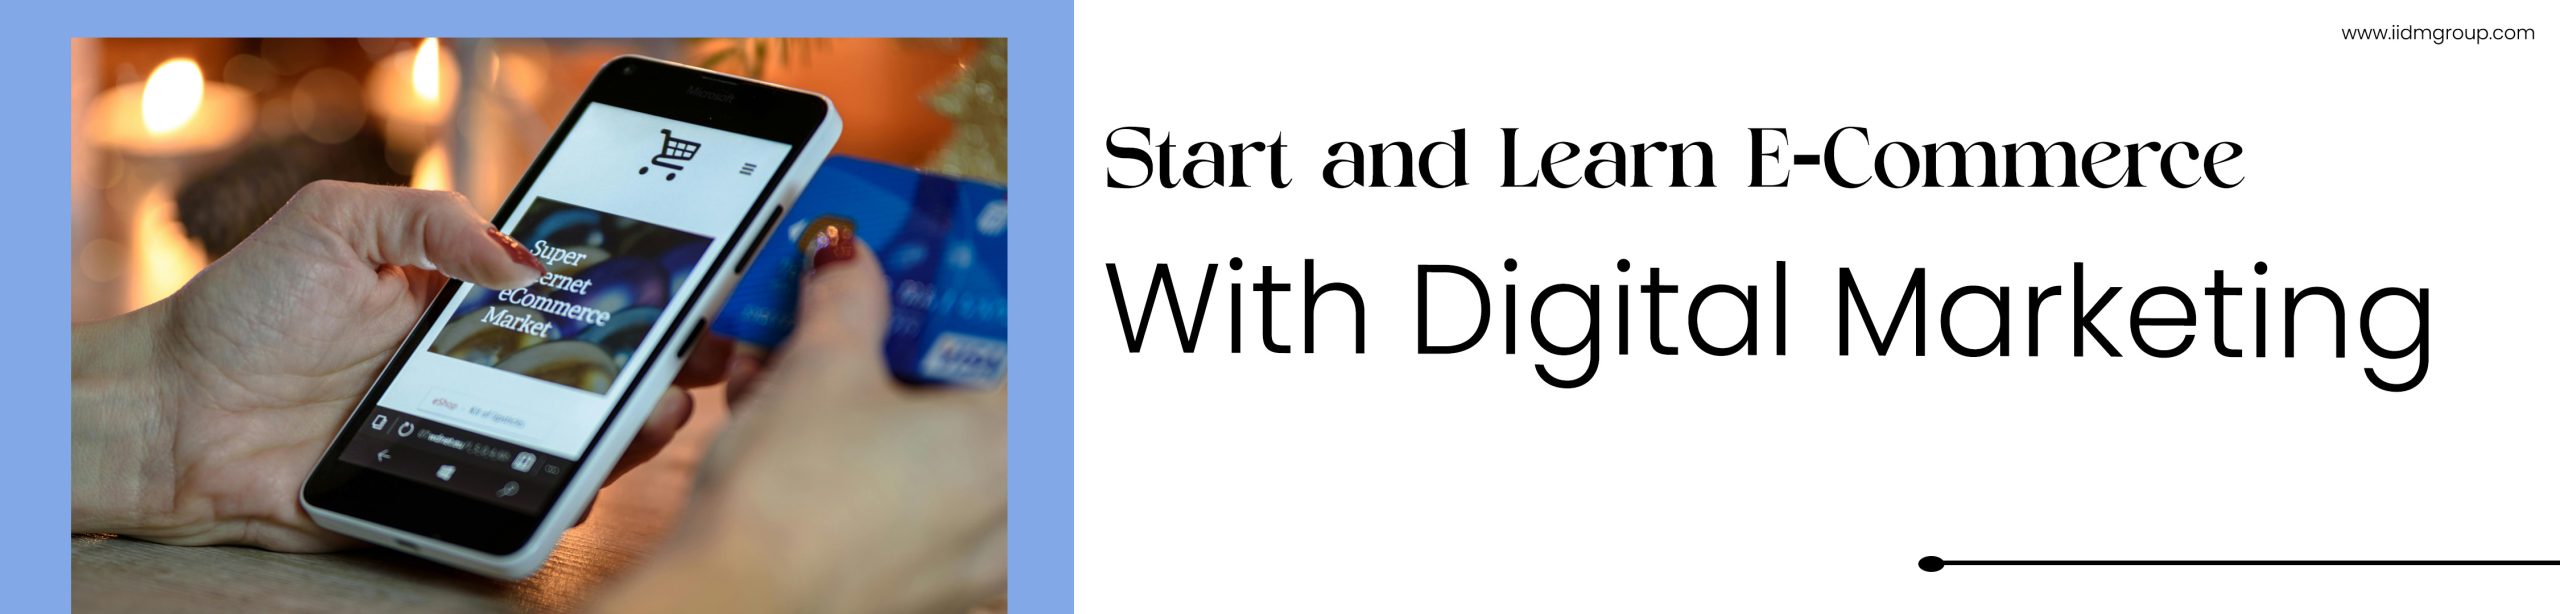 Start and Learn E-commerce with Digital Marketing